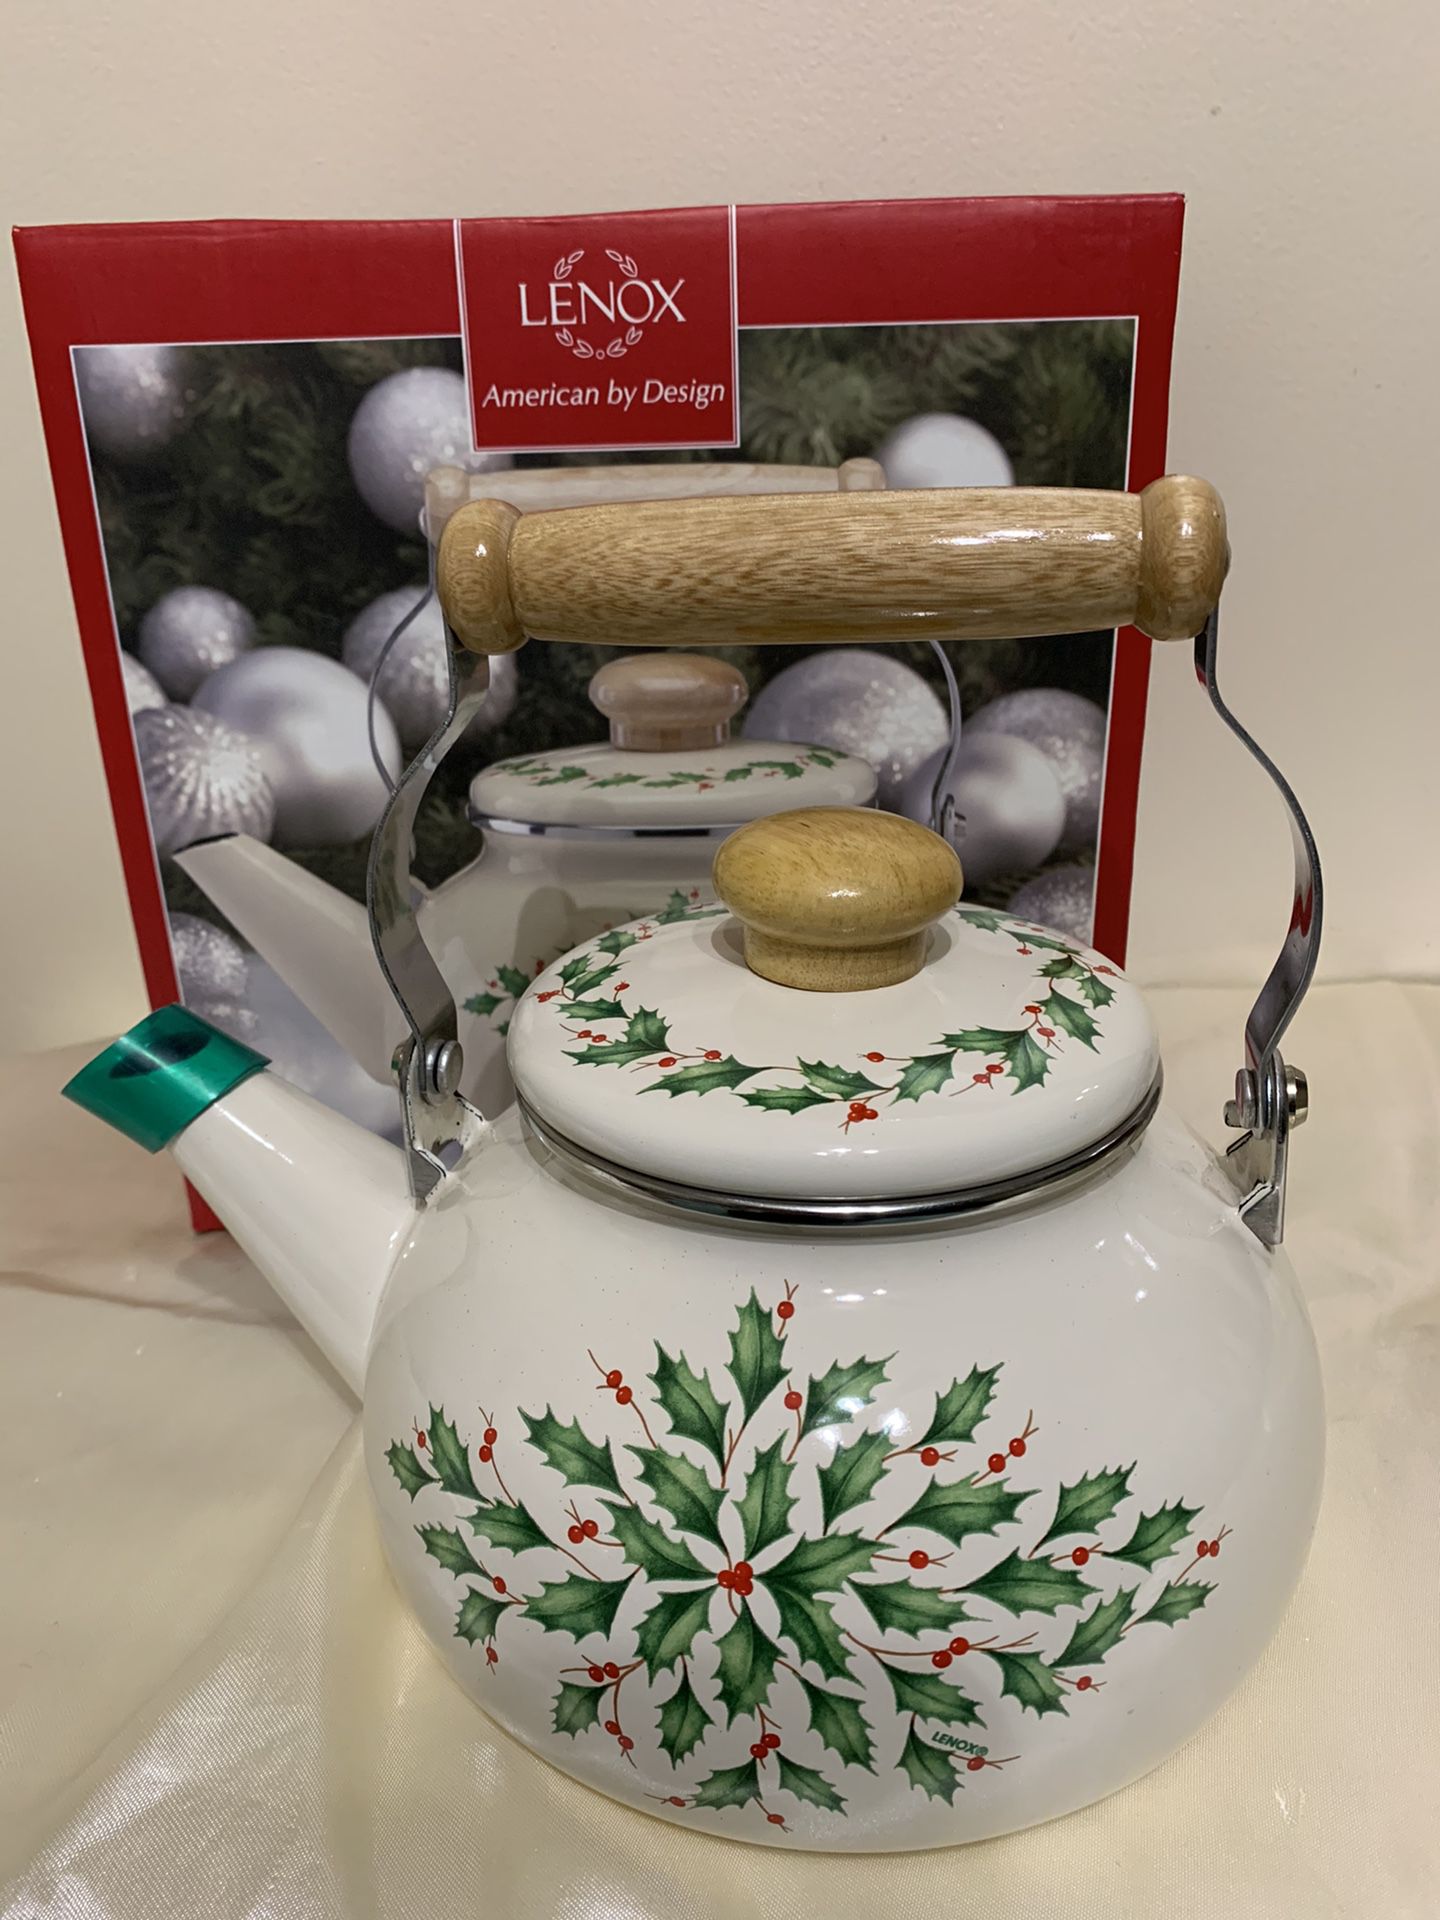 Lenox Holiday Metal Tea Kettle with wooden handles